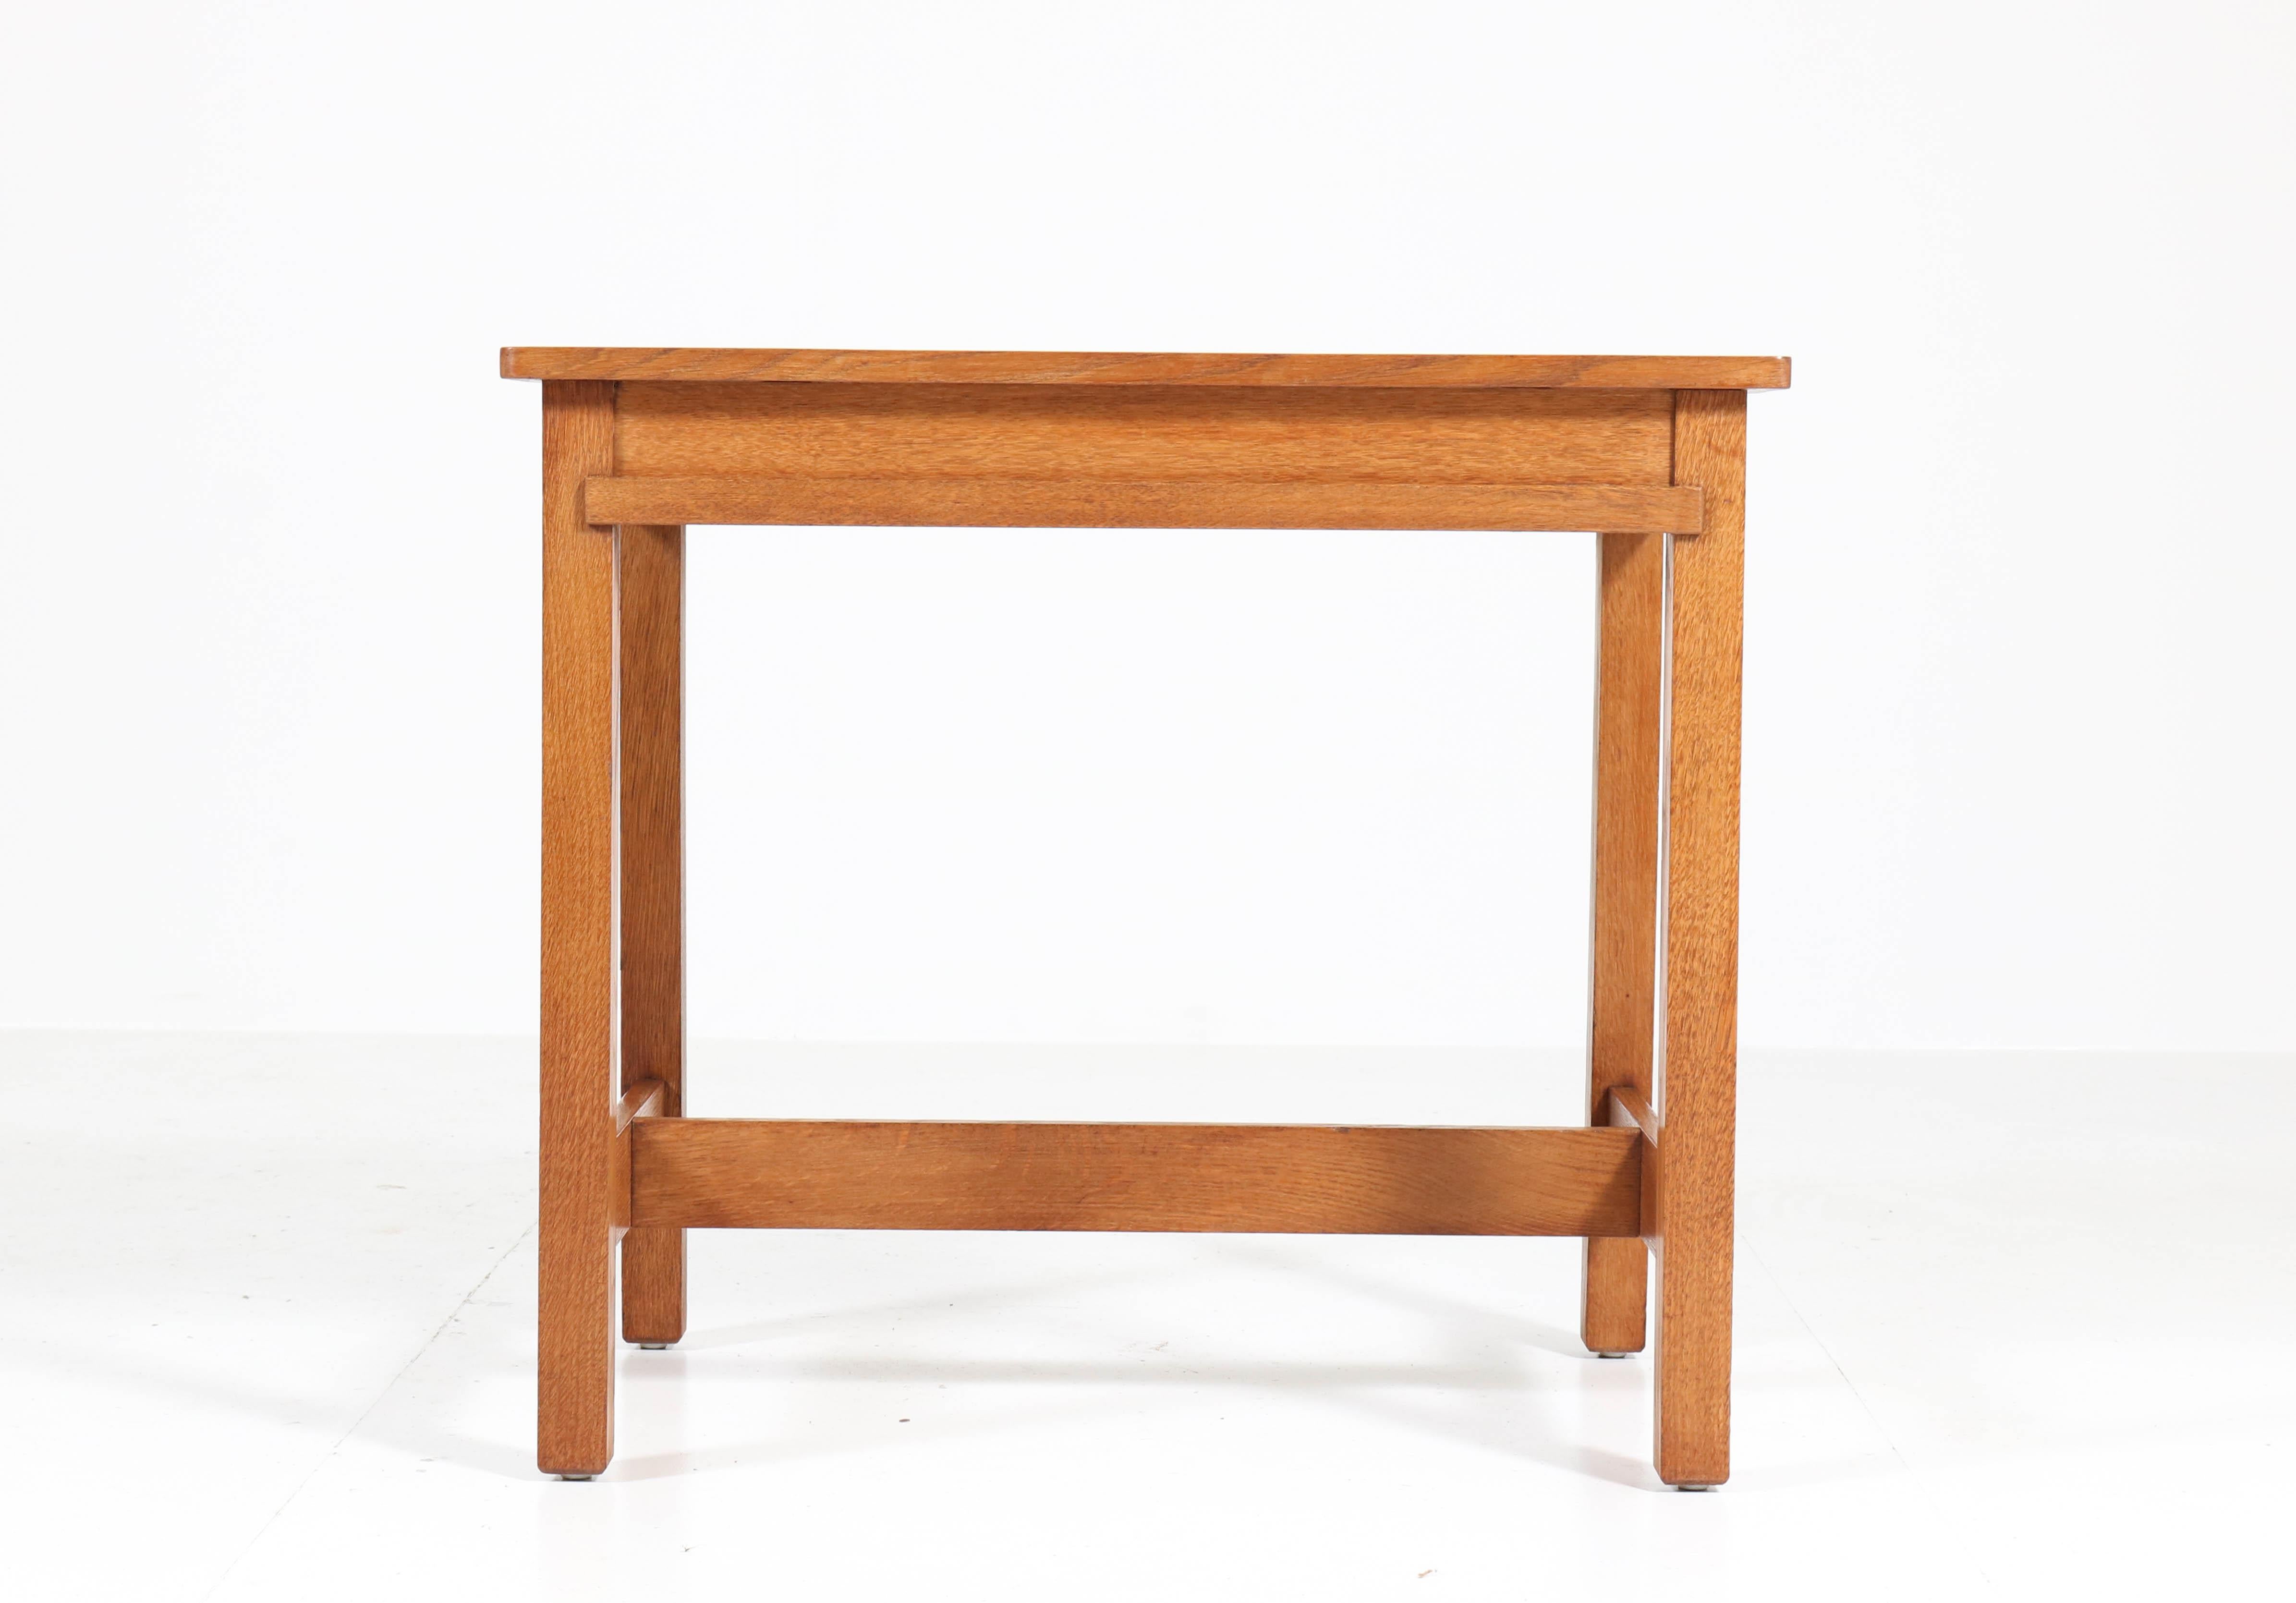 Early 20th Century Oak Art Deco Haagse School Writing Table by Hendrik Wouda for Pander, 1924